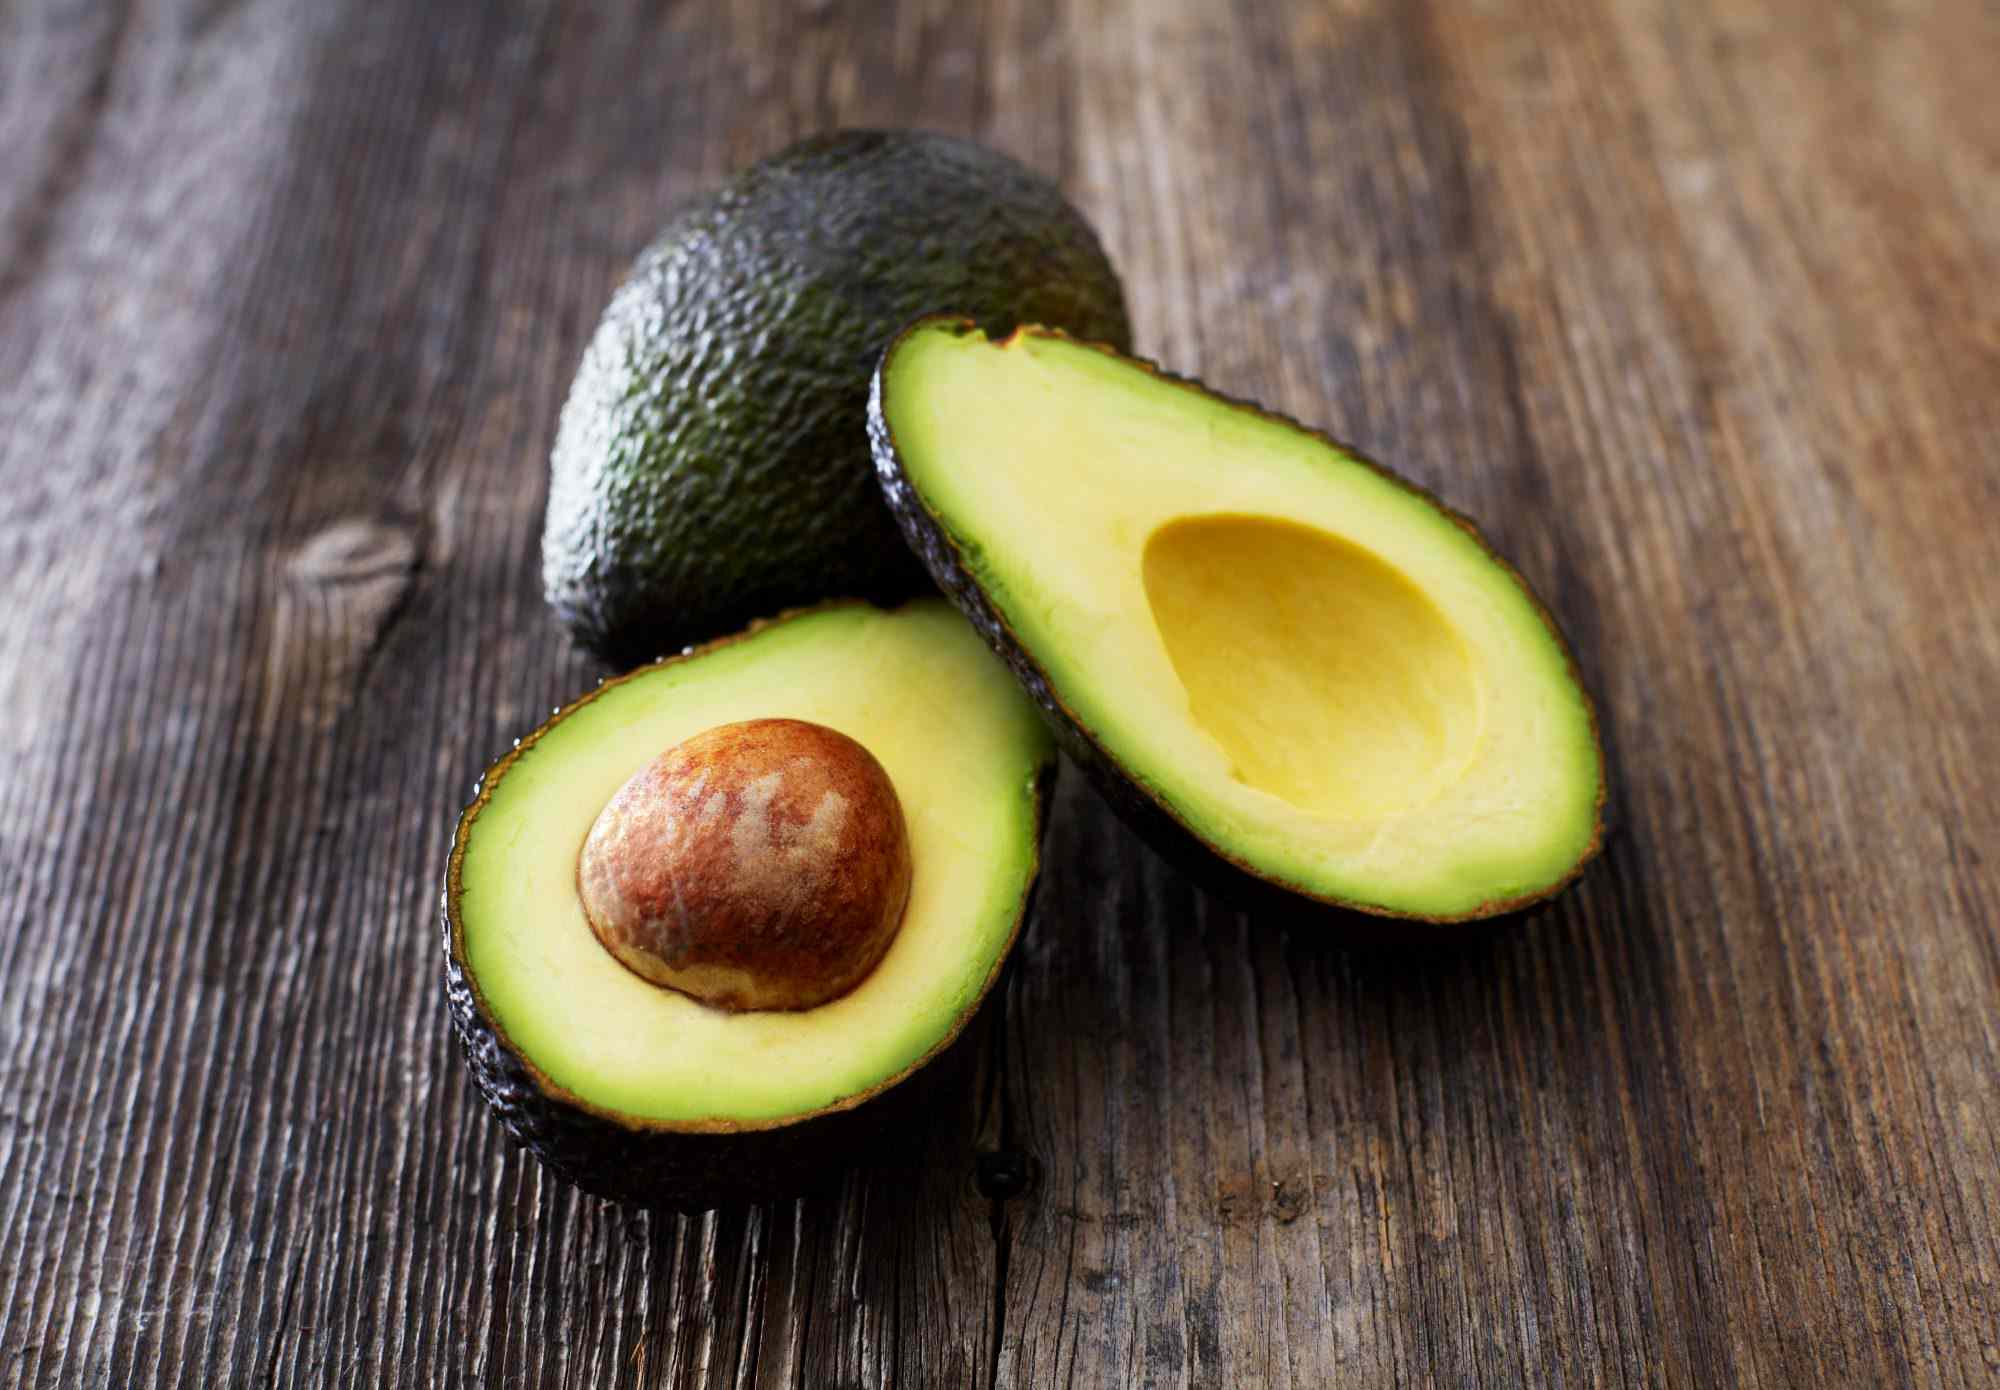 This Avocado Storing Hack Is More Dangerous Than You'd Think